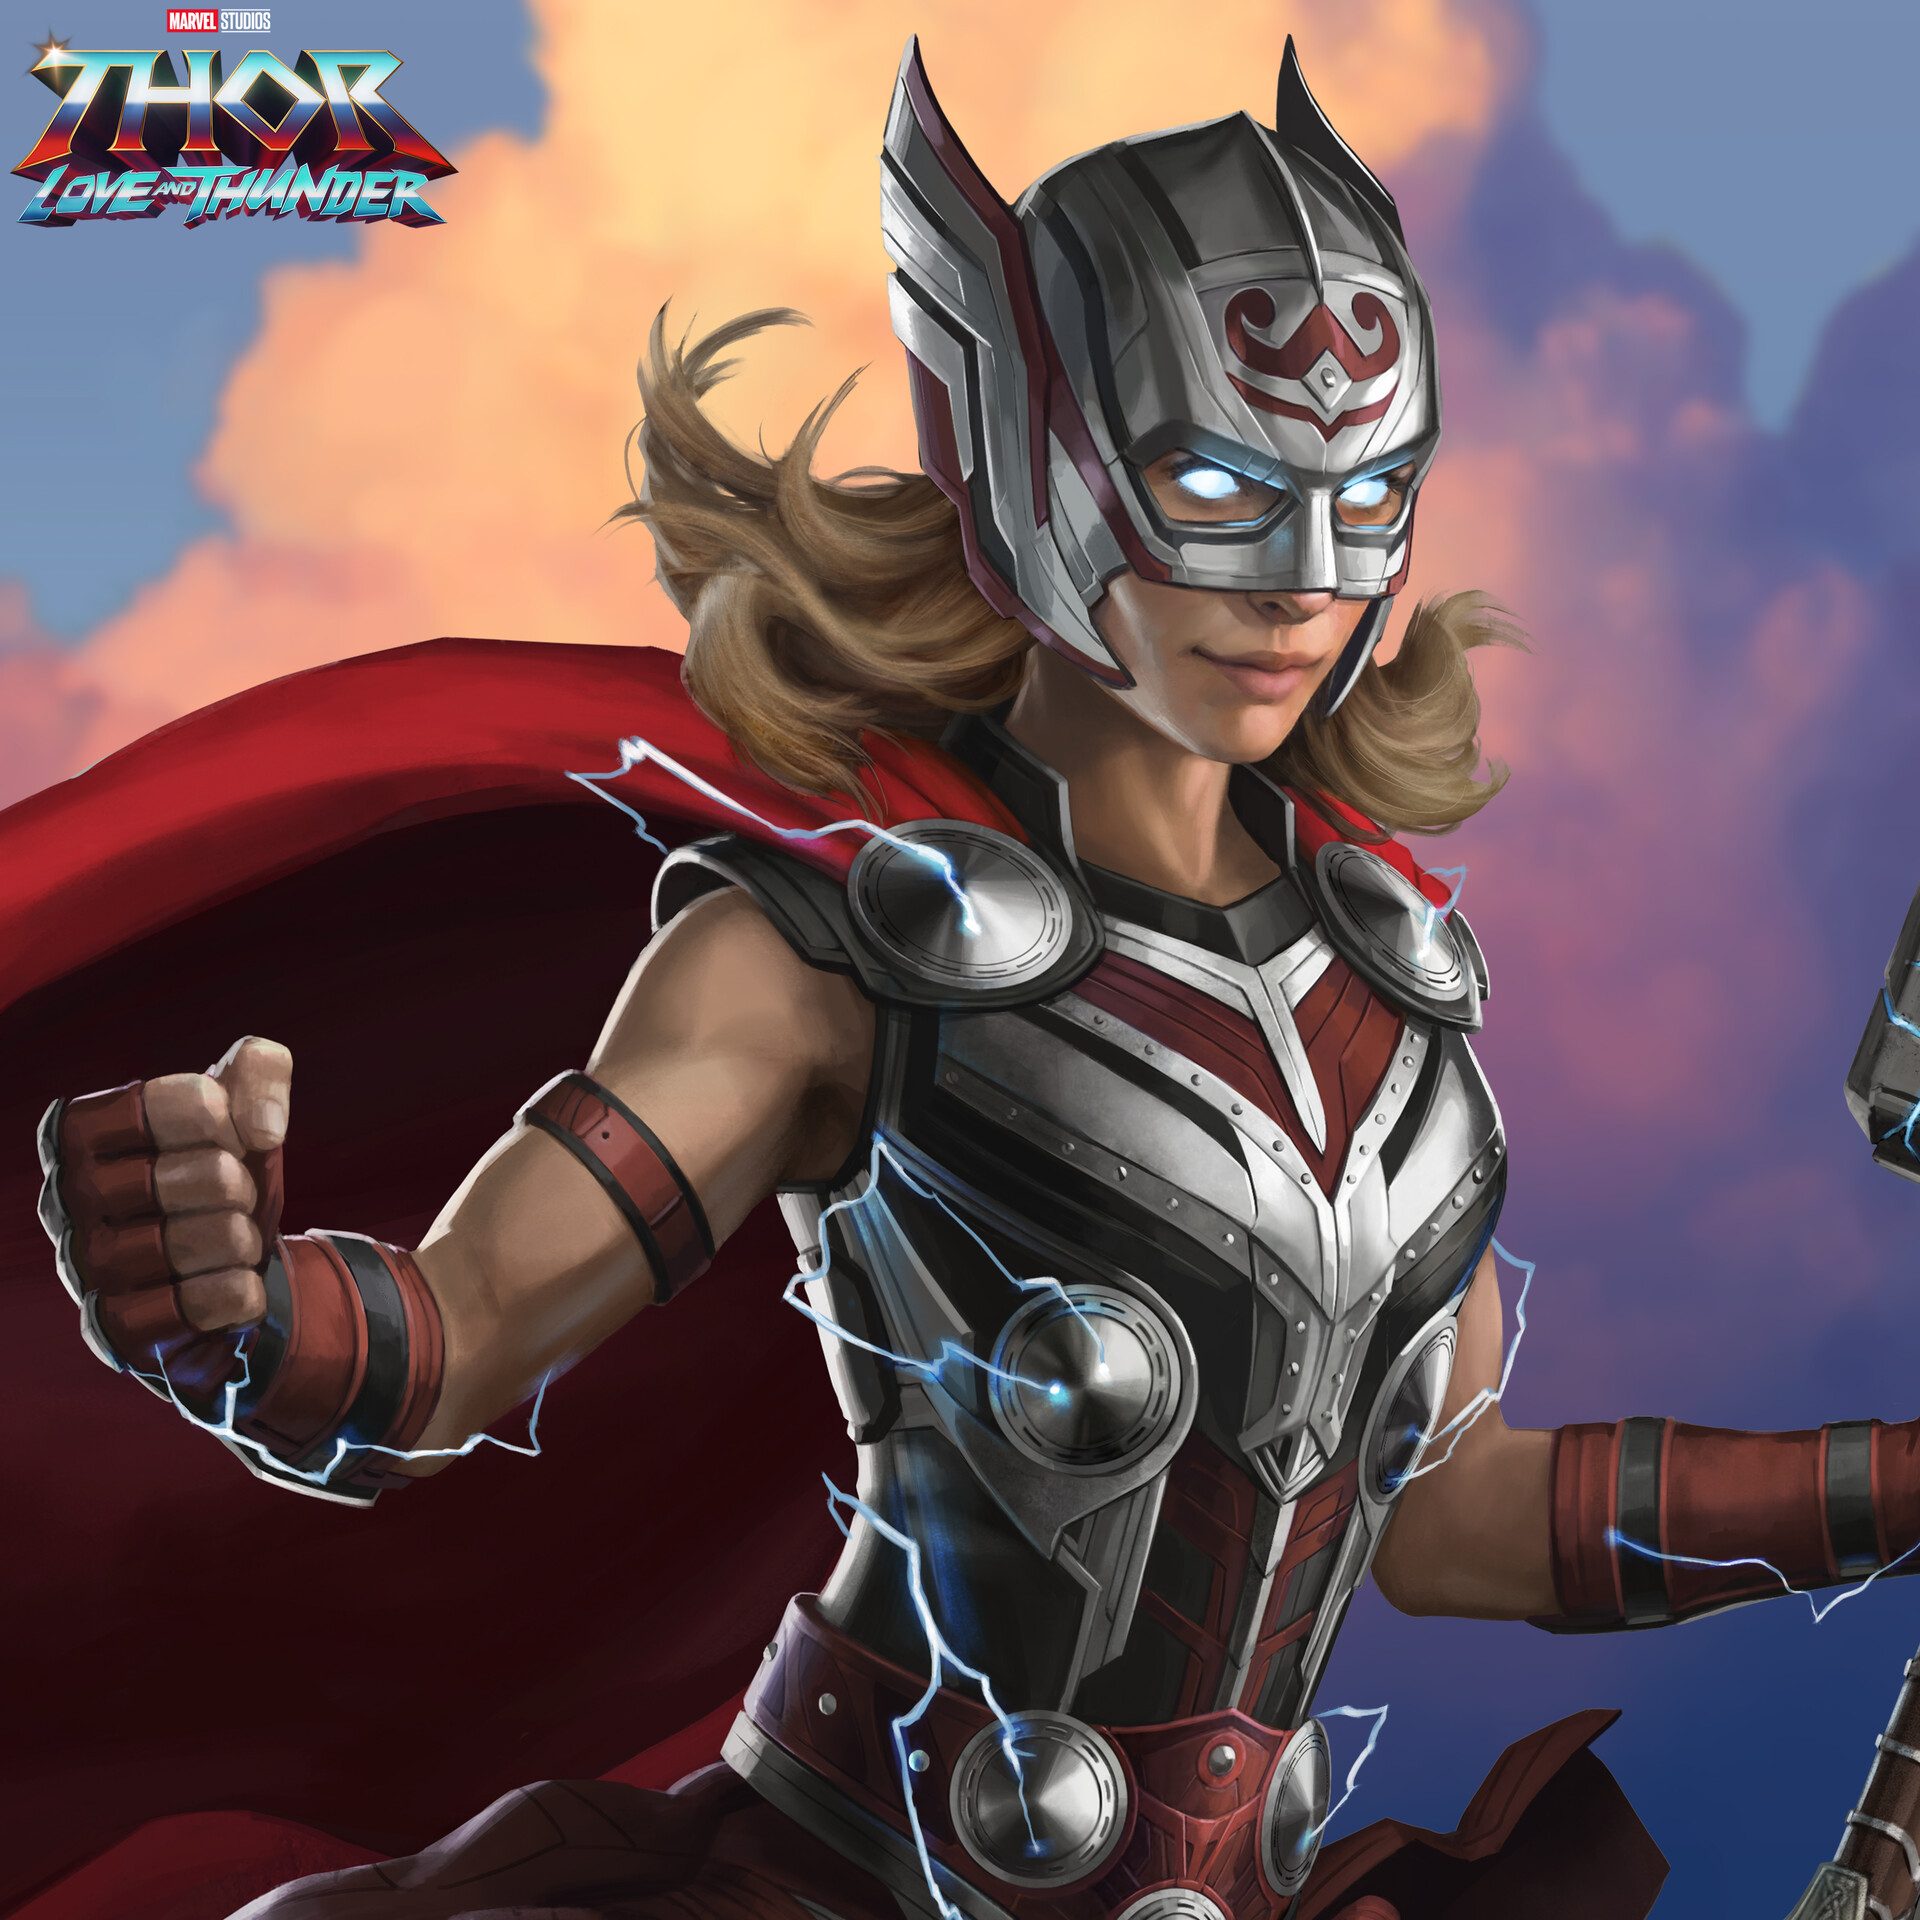 Thor: Love and Thunder Fan Casting on myCast